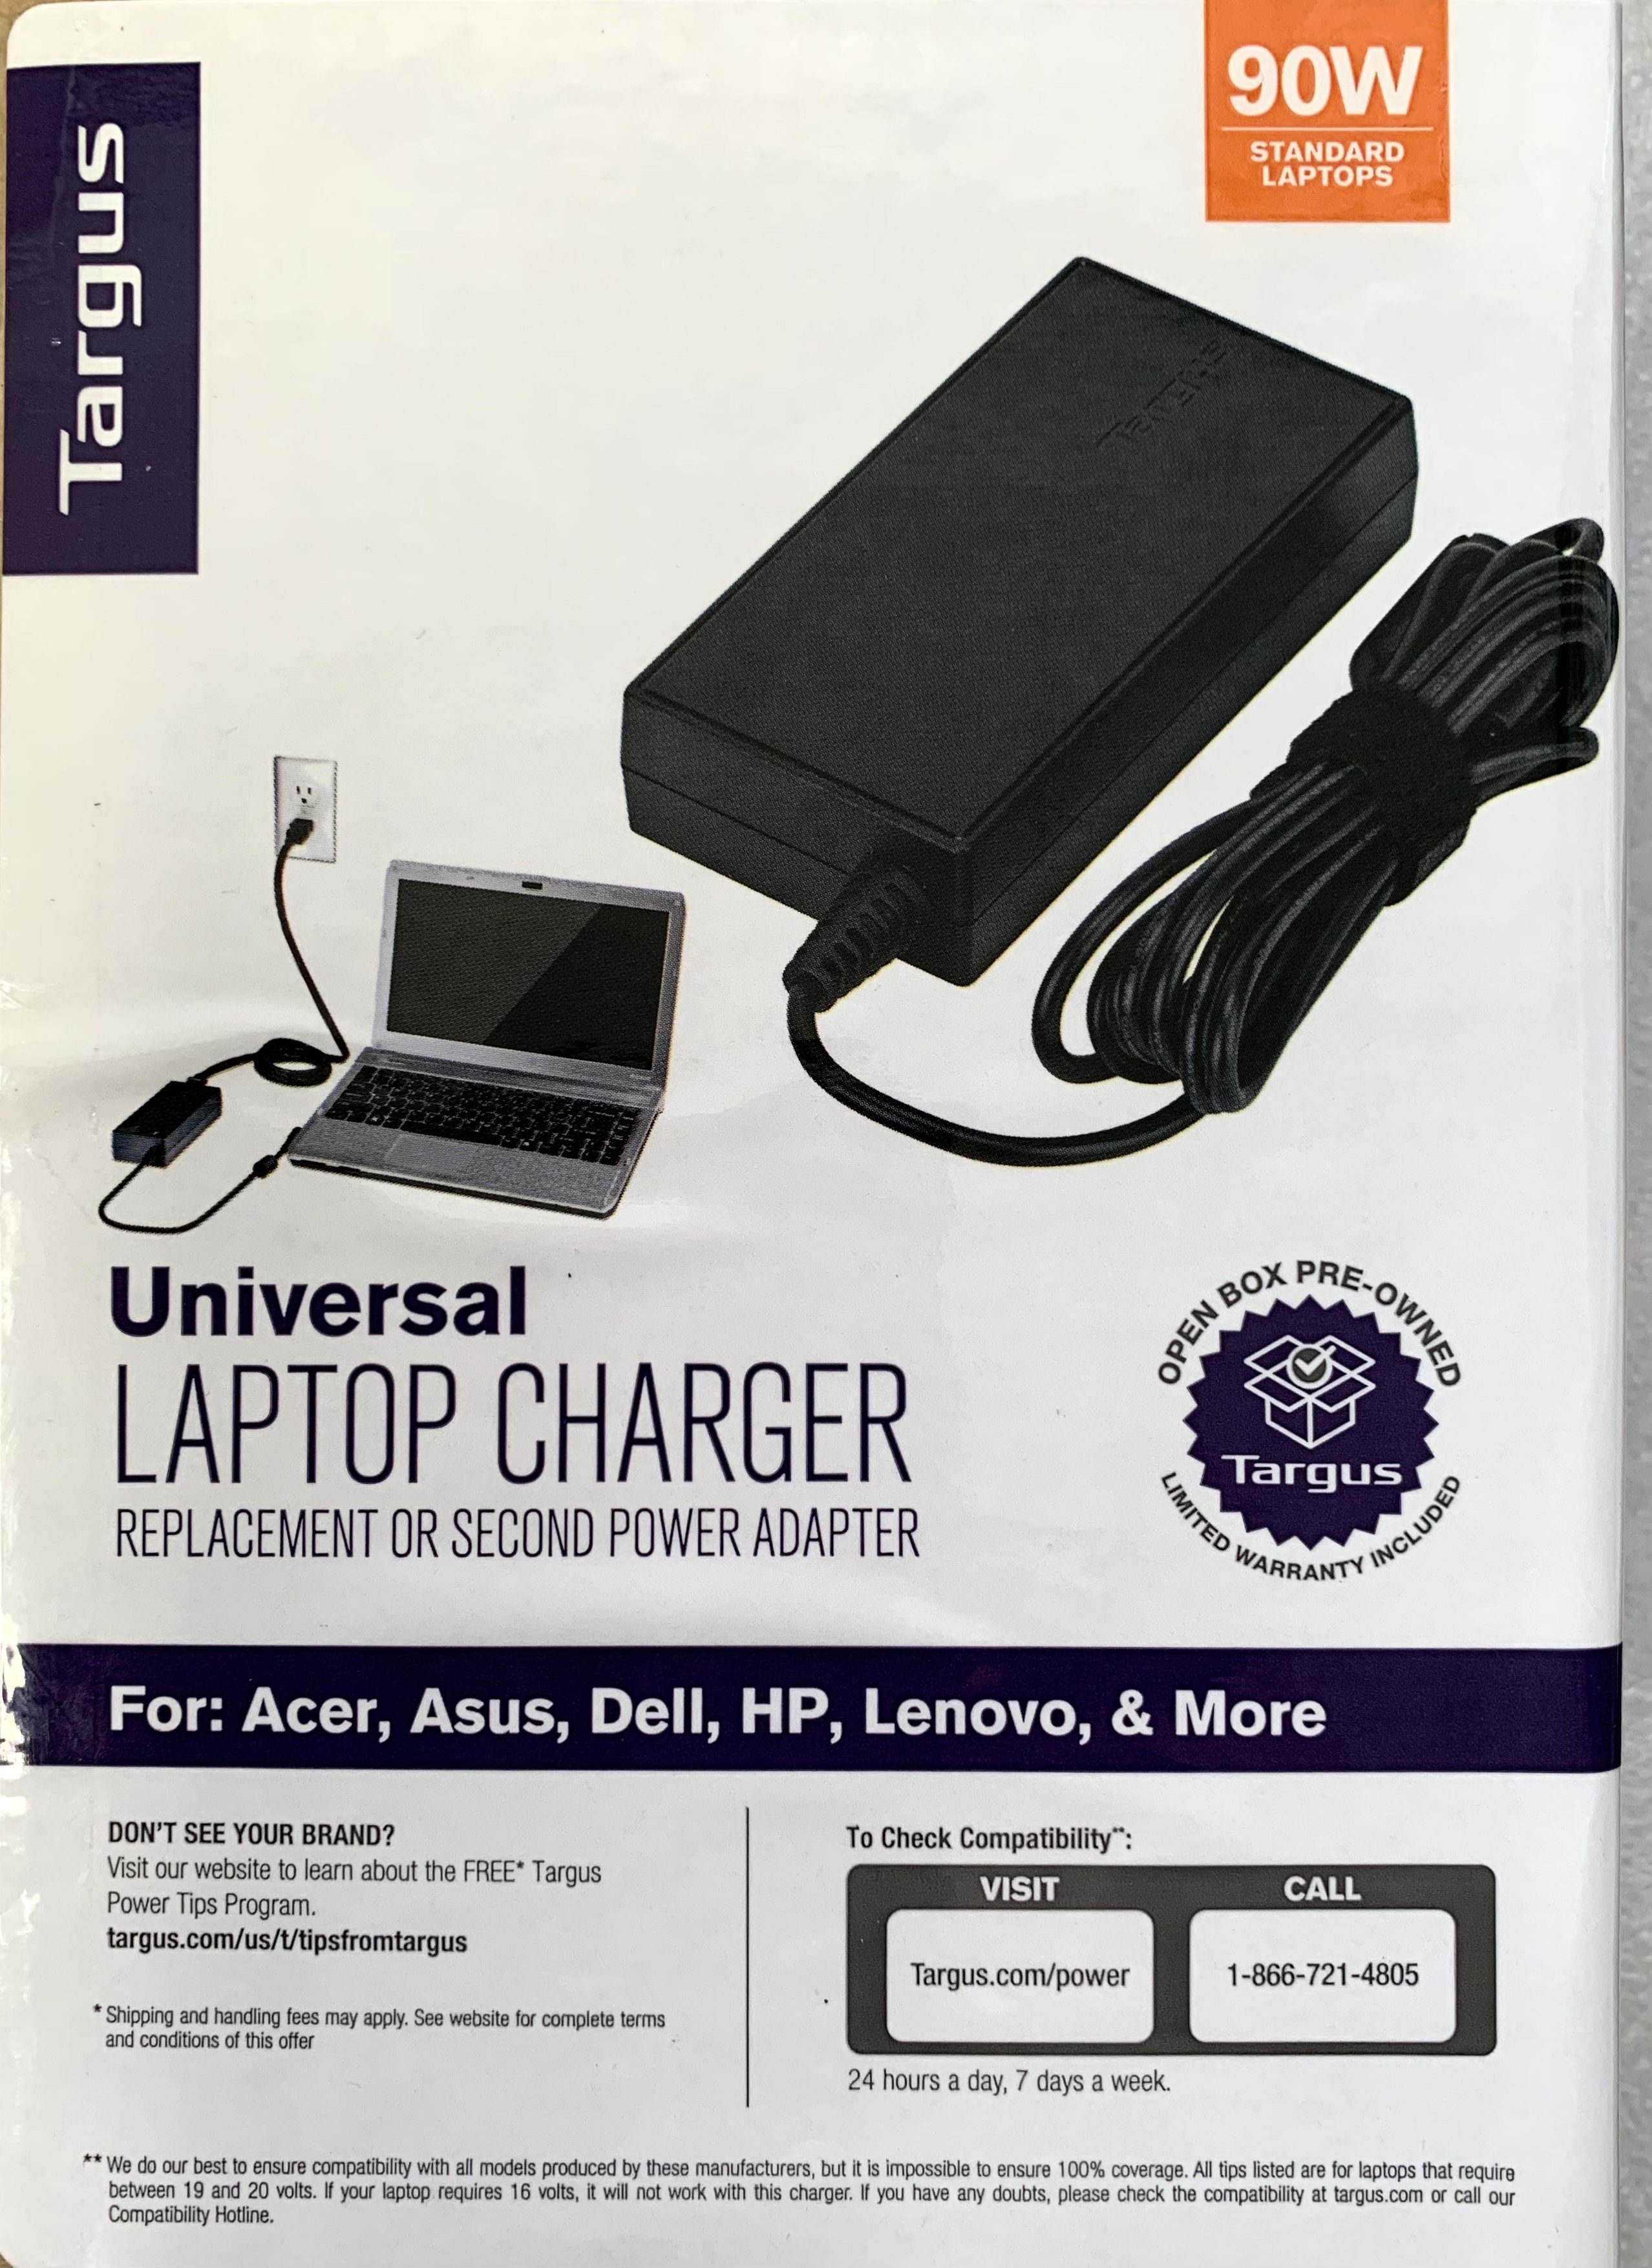 Targus 90 W Universal Laptop Charger for Acer, Asus, Dell, HP, Lenovo & More (APA790USO-72R)